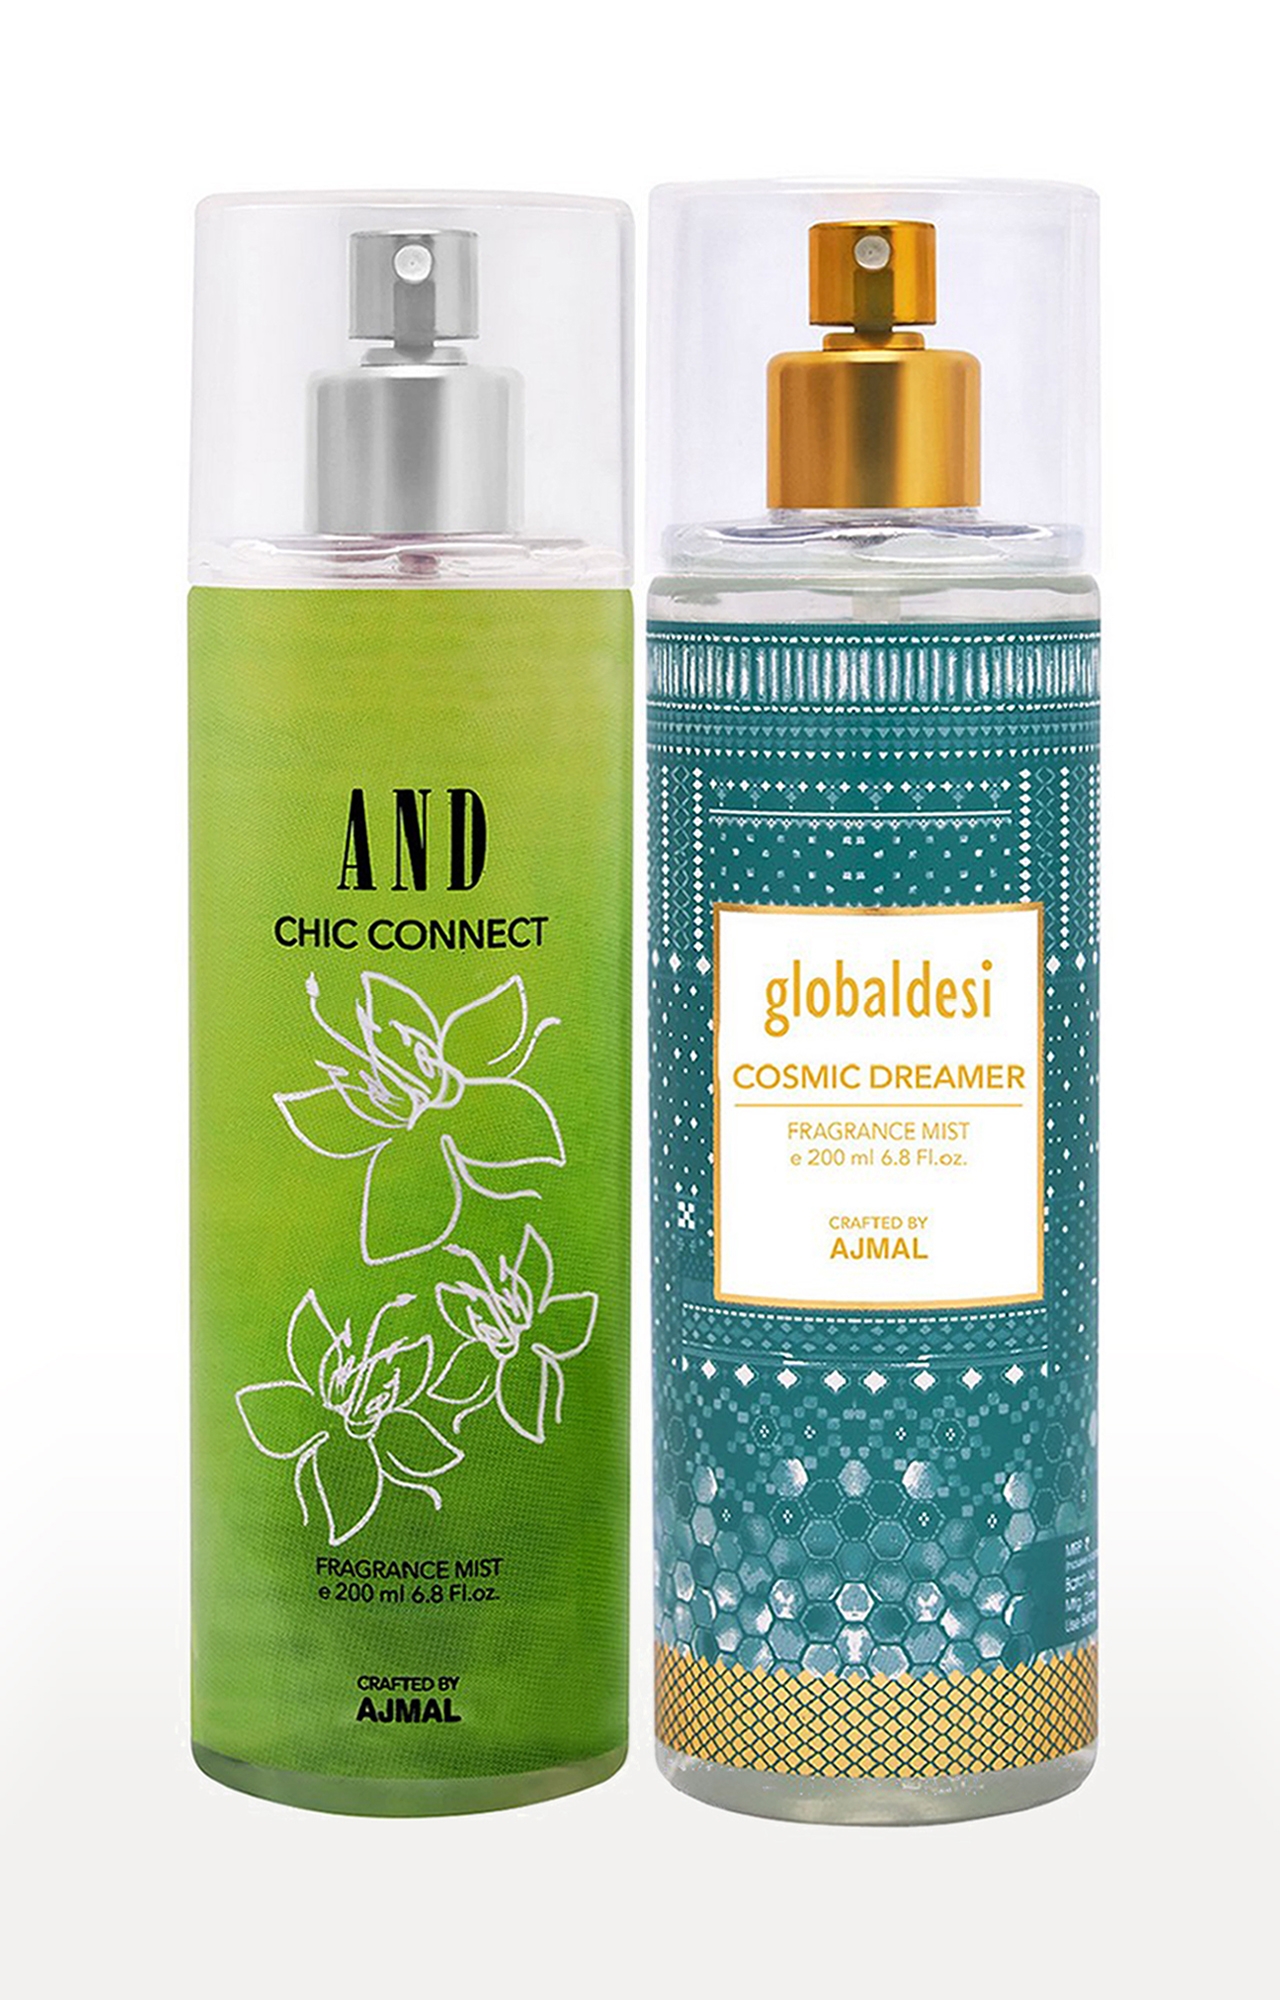 AND Chi Connect Body Mist 200ML & Global Desi Cosmic Dreamer Body Mist 200ML Long Lasting Scent Spray Gift For Women Perfume FREE